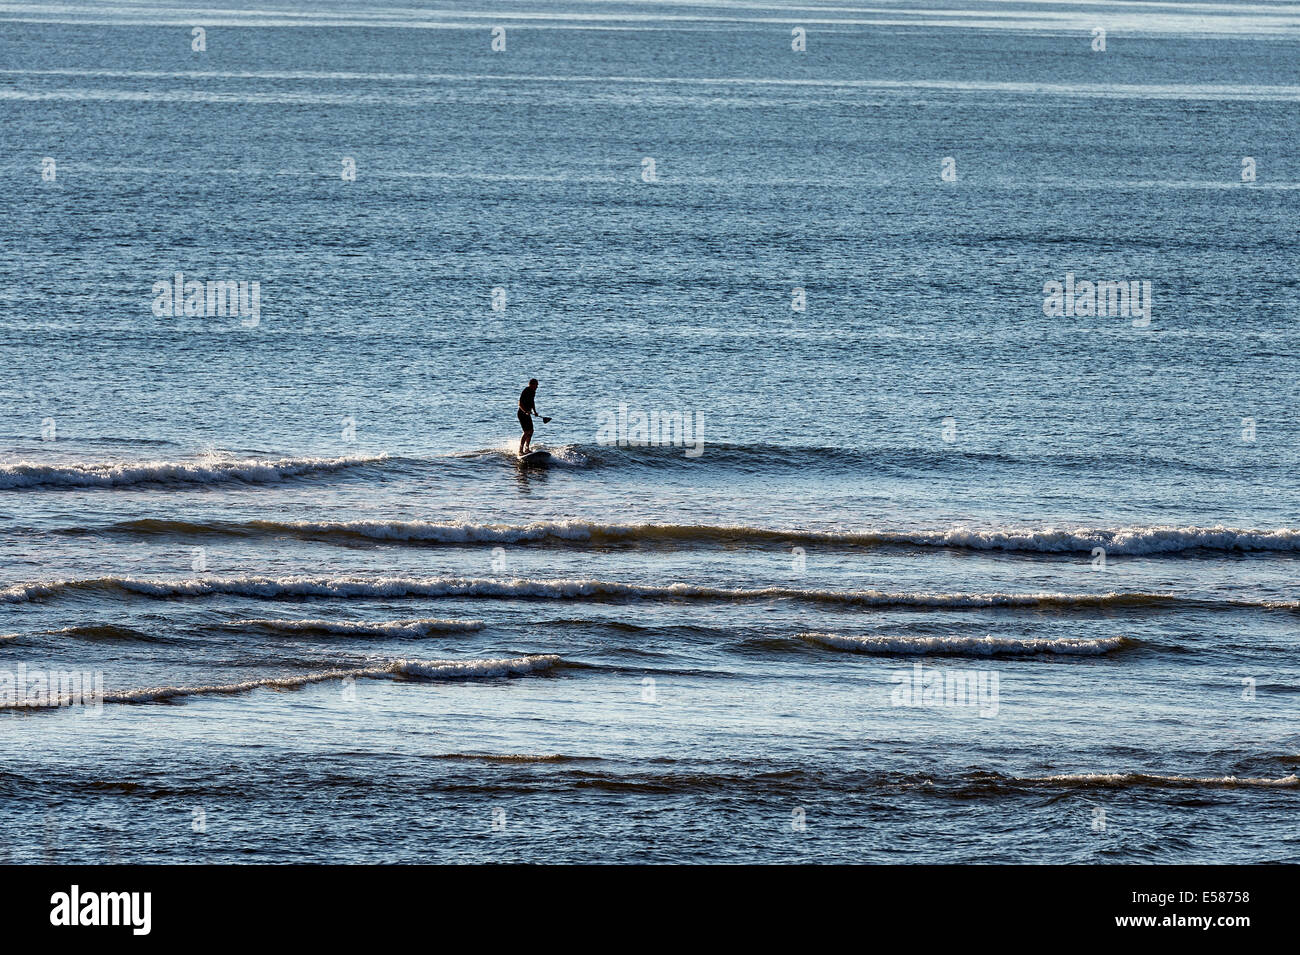 Paddle board surfer heads out to catch a wave, Coast Guard Beach, Cape Cod, Massachusetts, USA Stock Photo